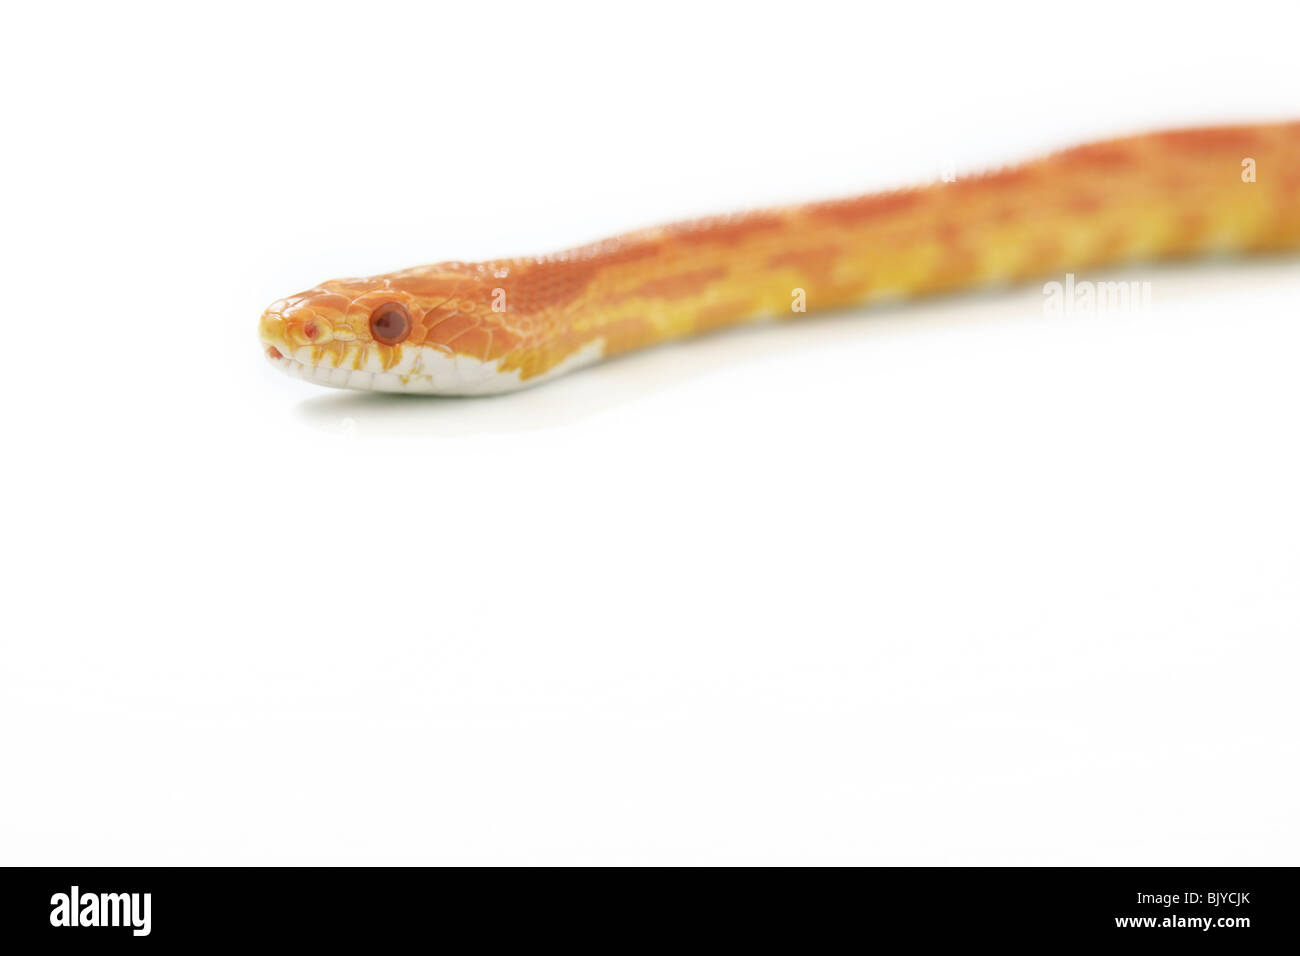 Corn snake photographed on a white background Stock Photo